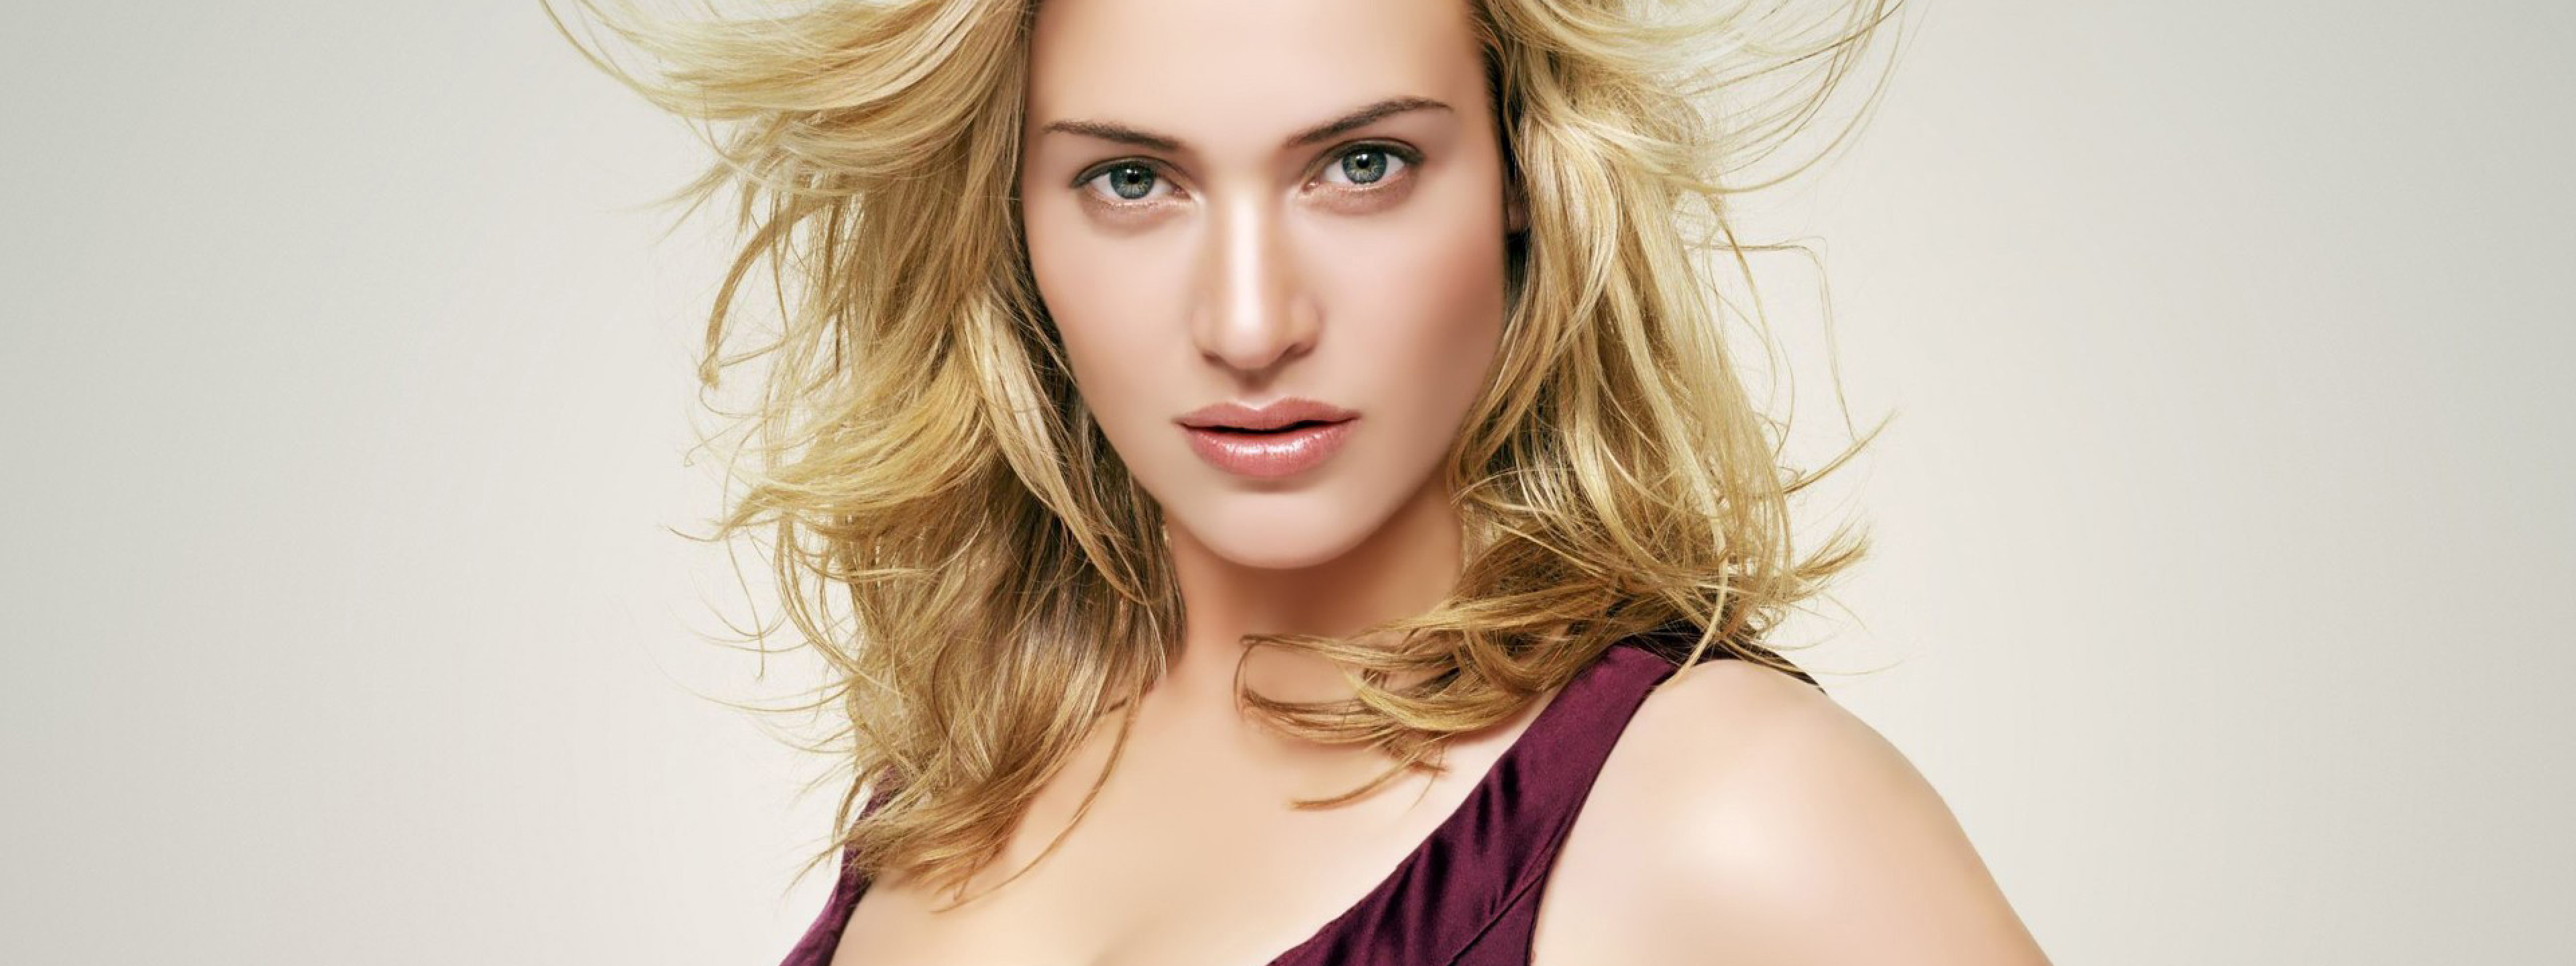 3840x1440 Resolution Kate Winslet Beautiful Wallpapers 3840x1440 ...